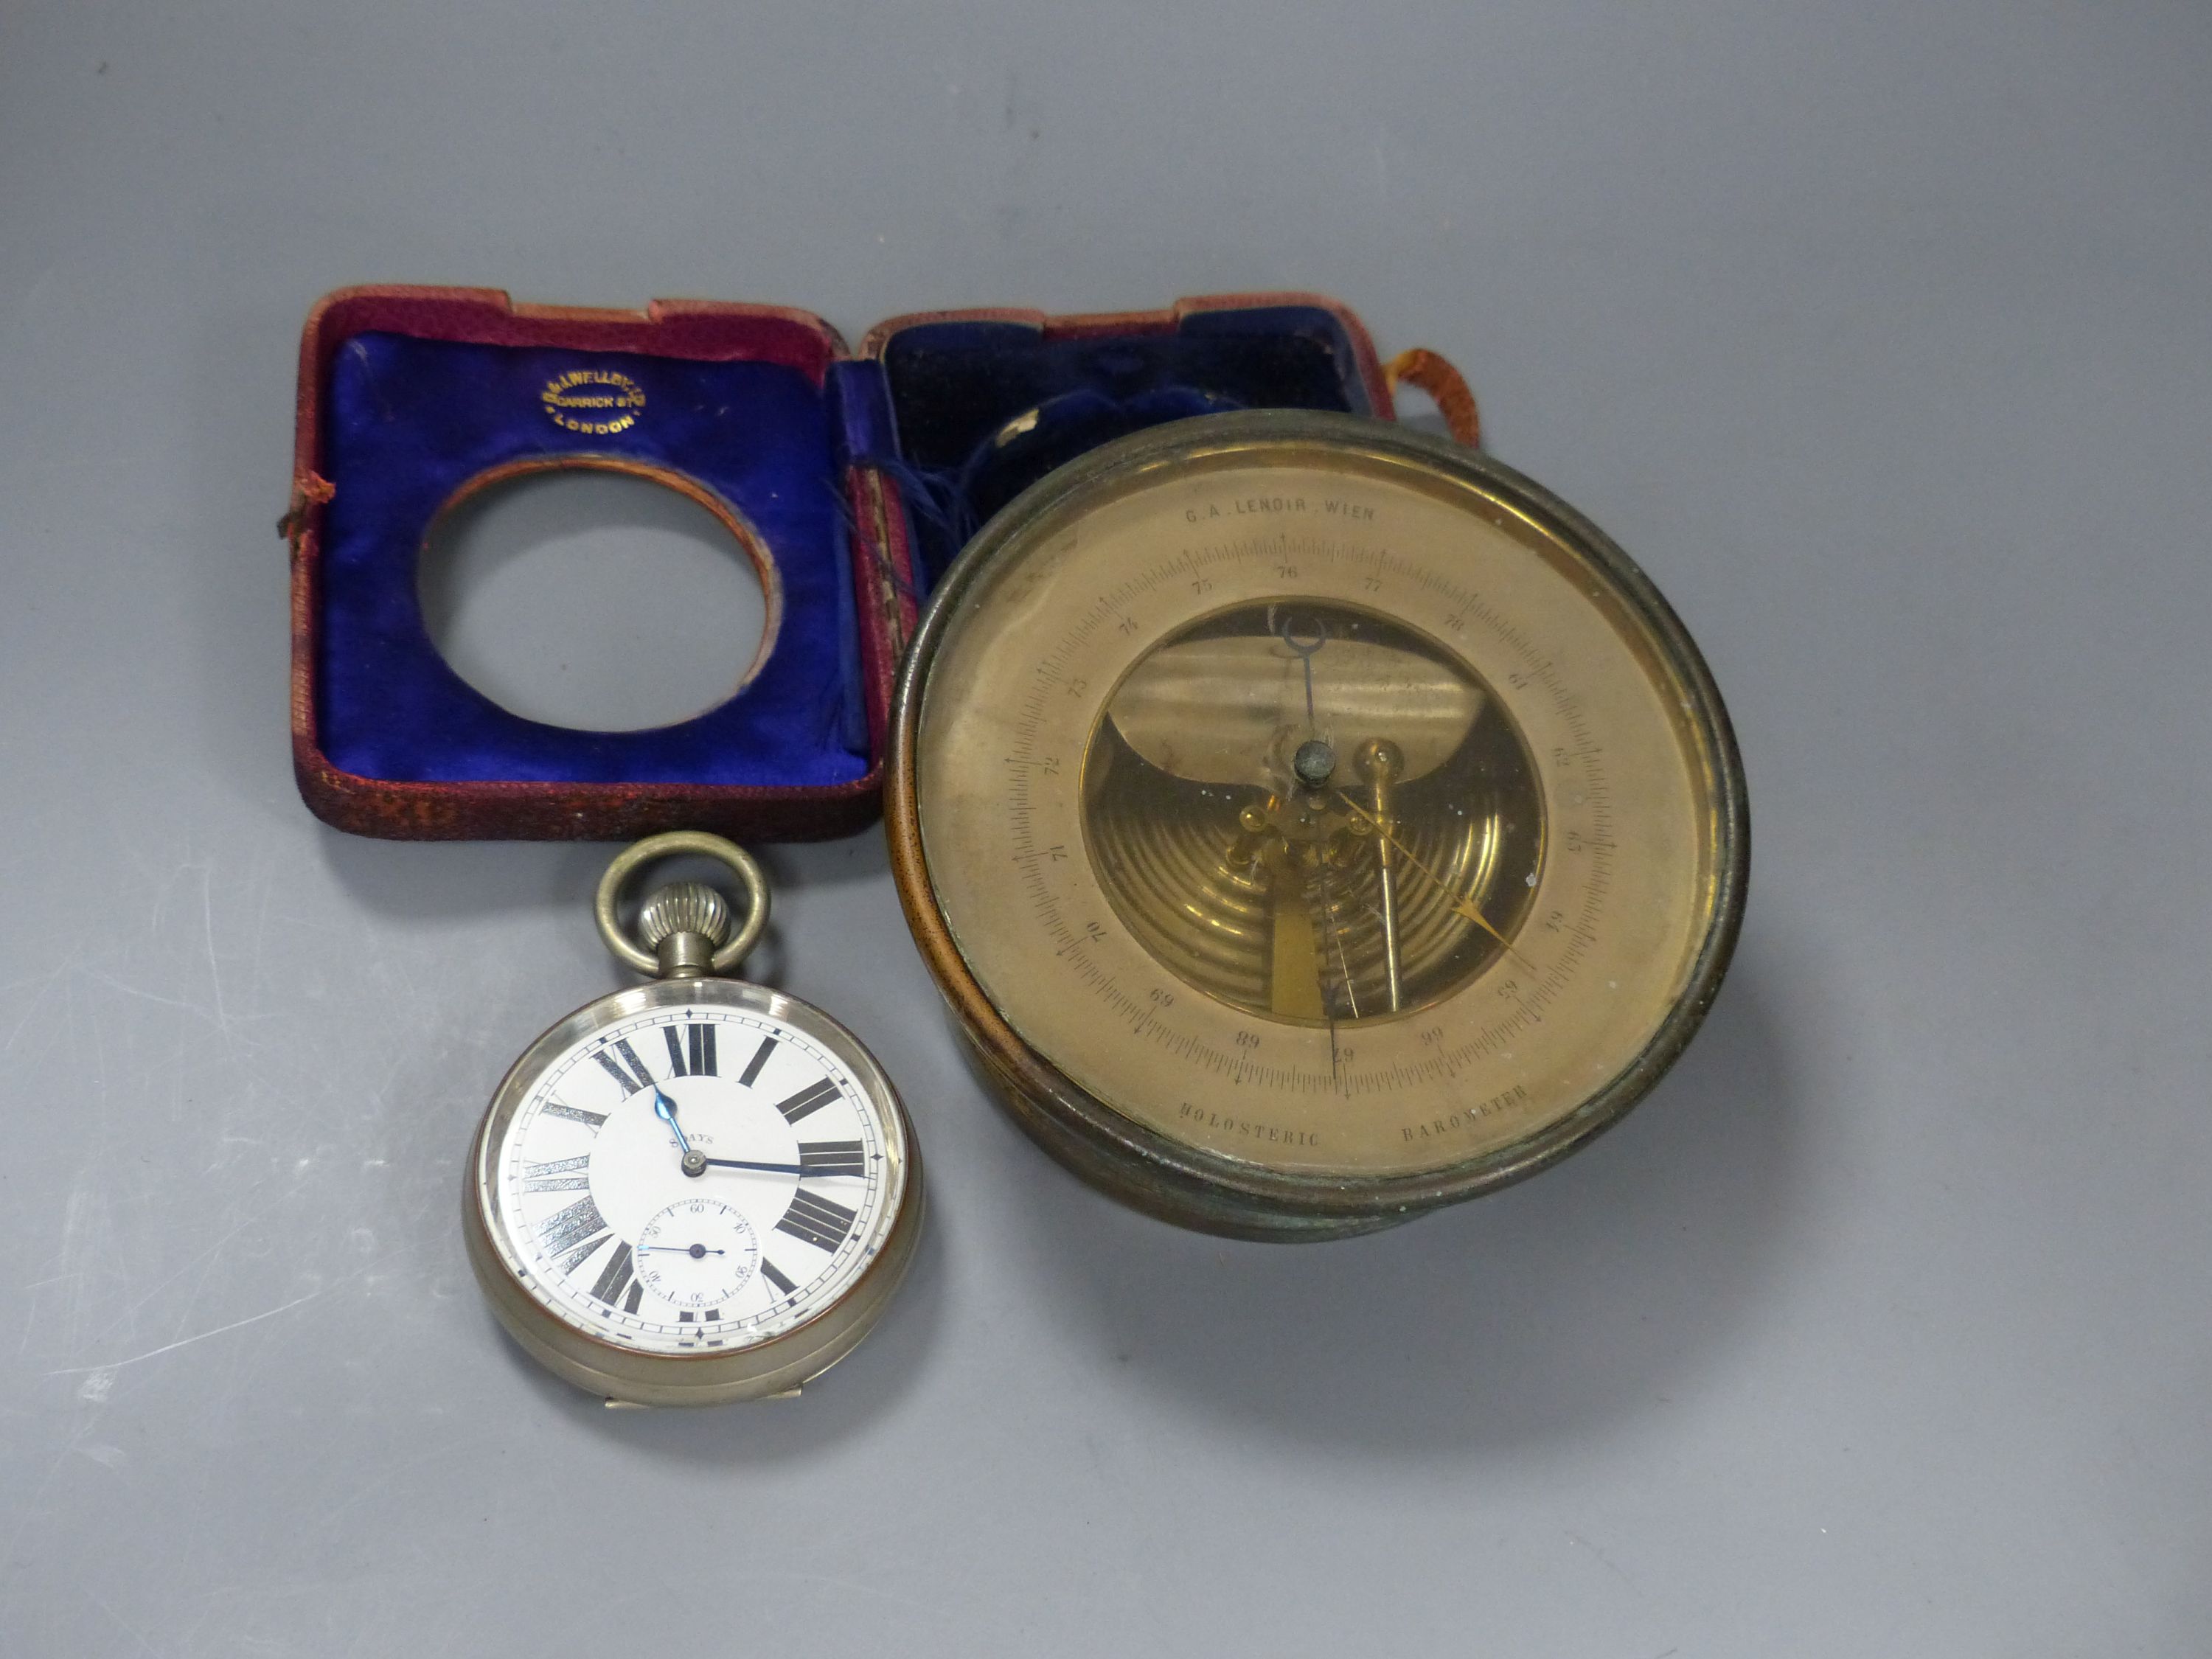 A G.A. Lenoir Wien Holosteric barometer and a cased Goliath eight day pocket watch